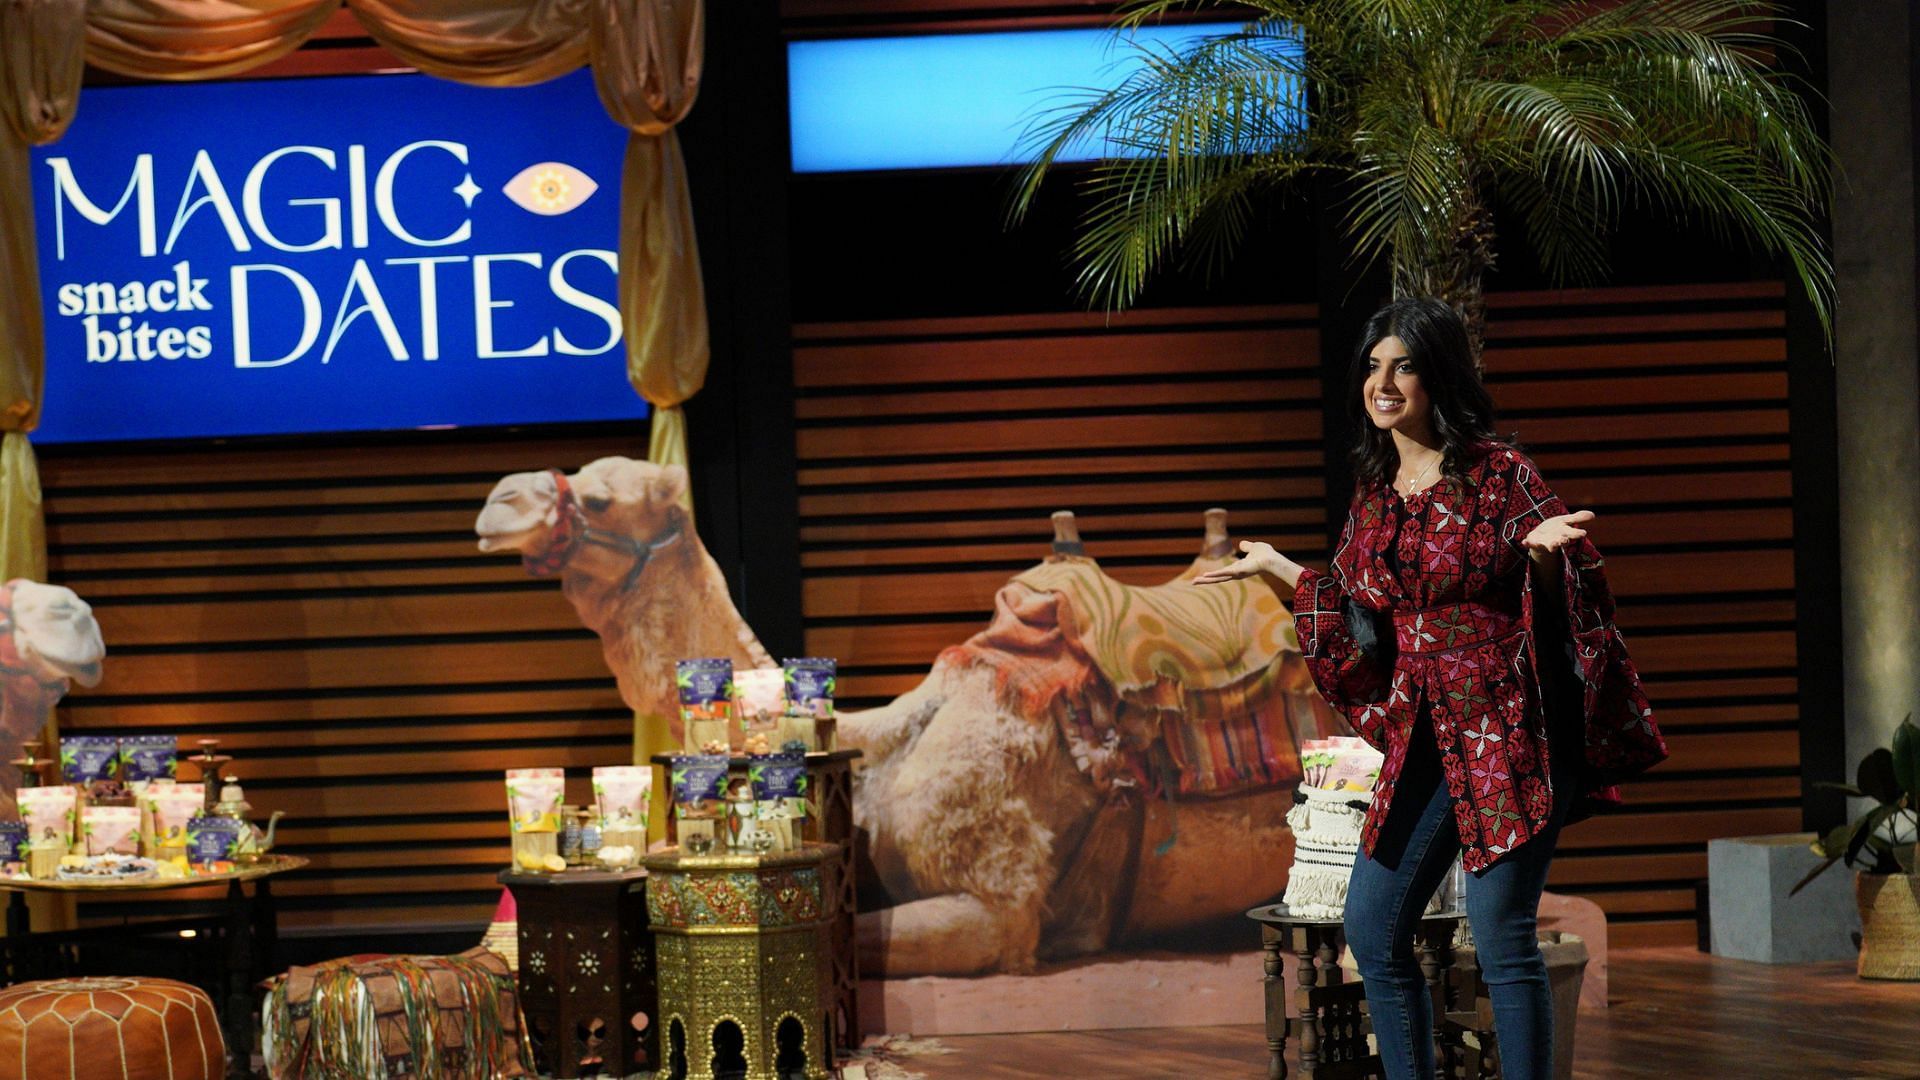 Magic Dates on Shark Tank Cost, founder, and more about business that